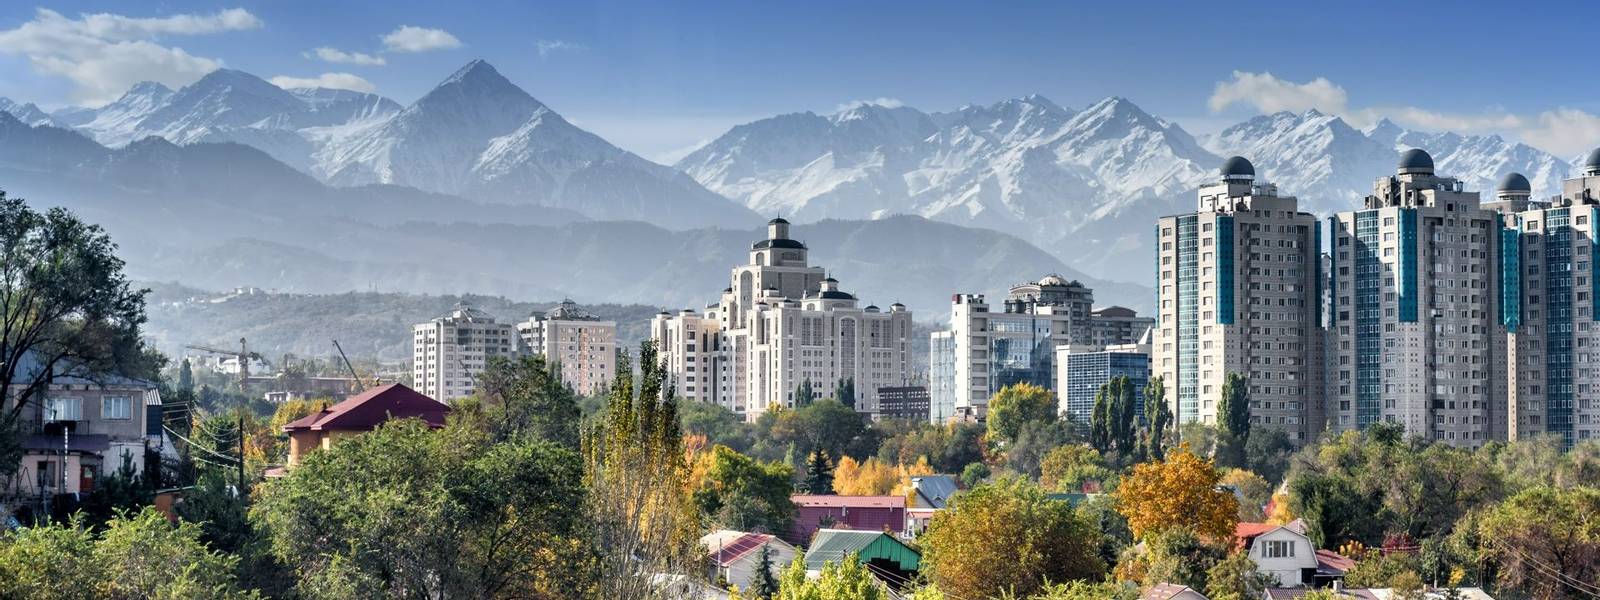 City landscape on a background of snow-capped mountains